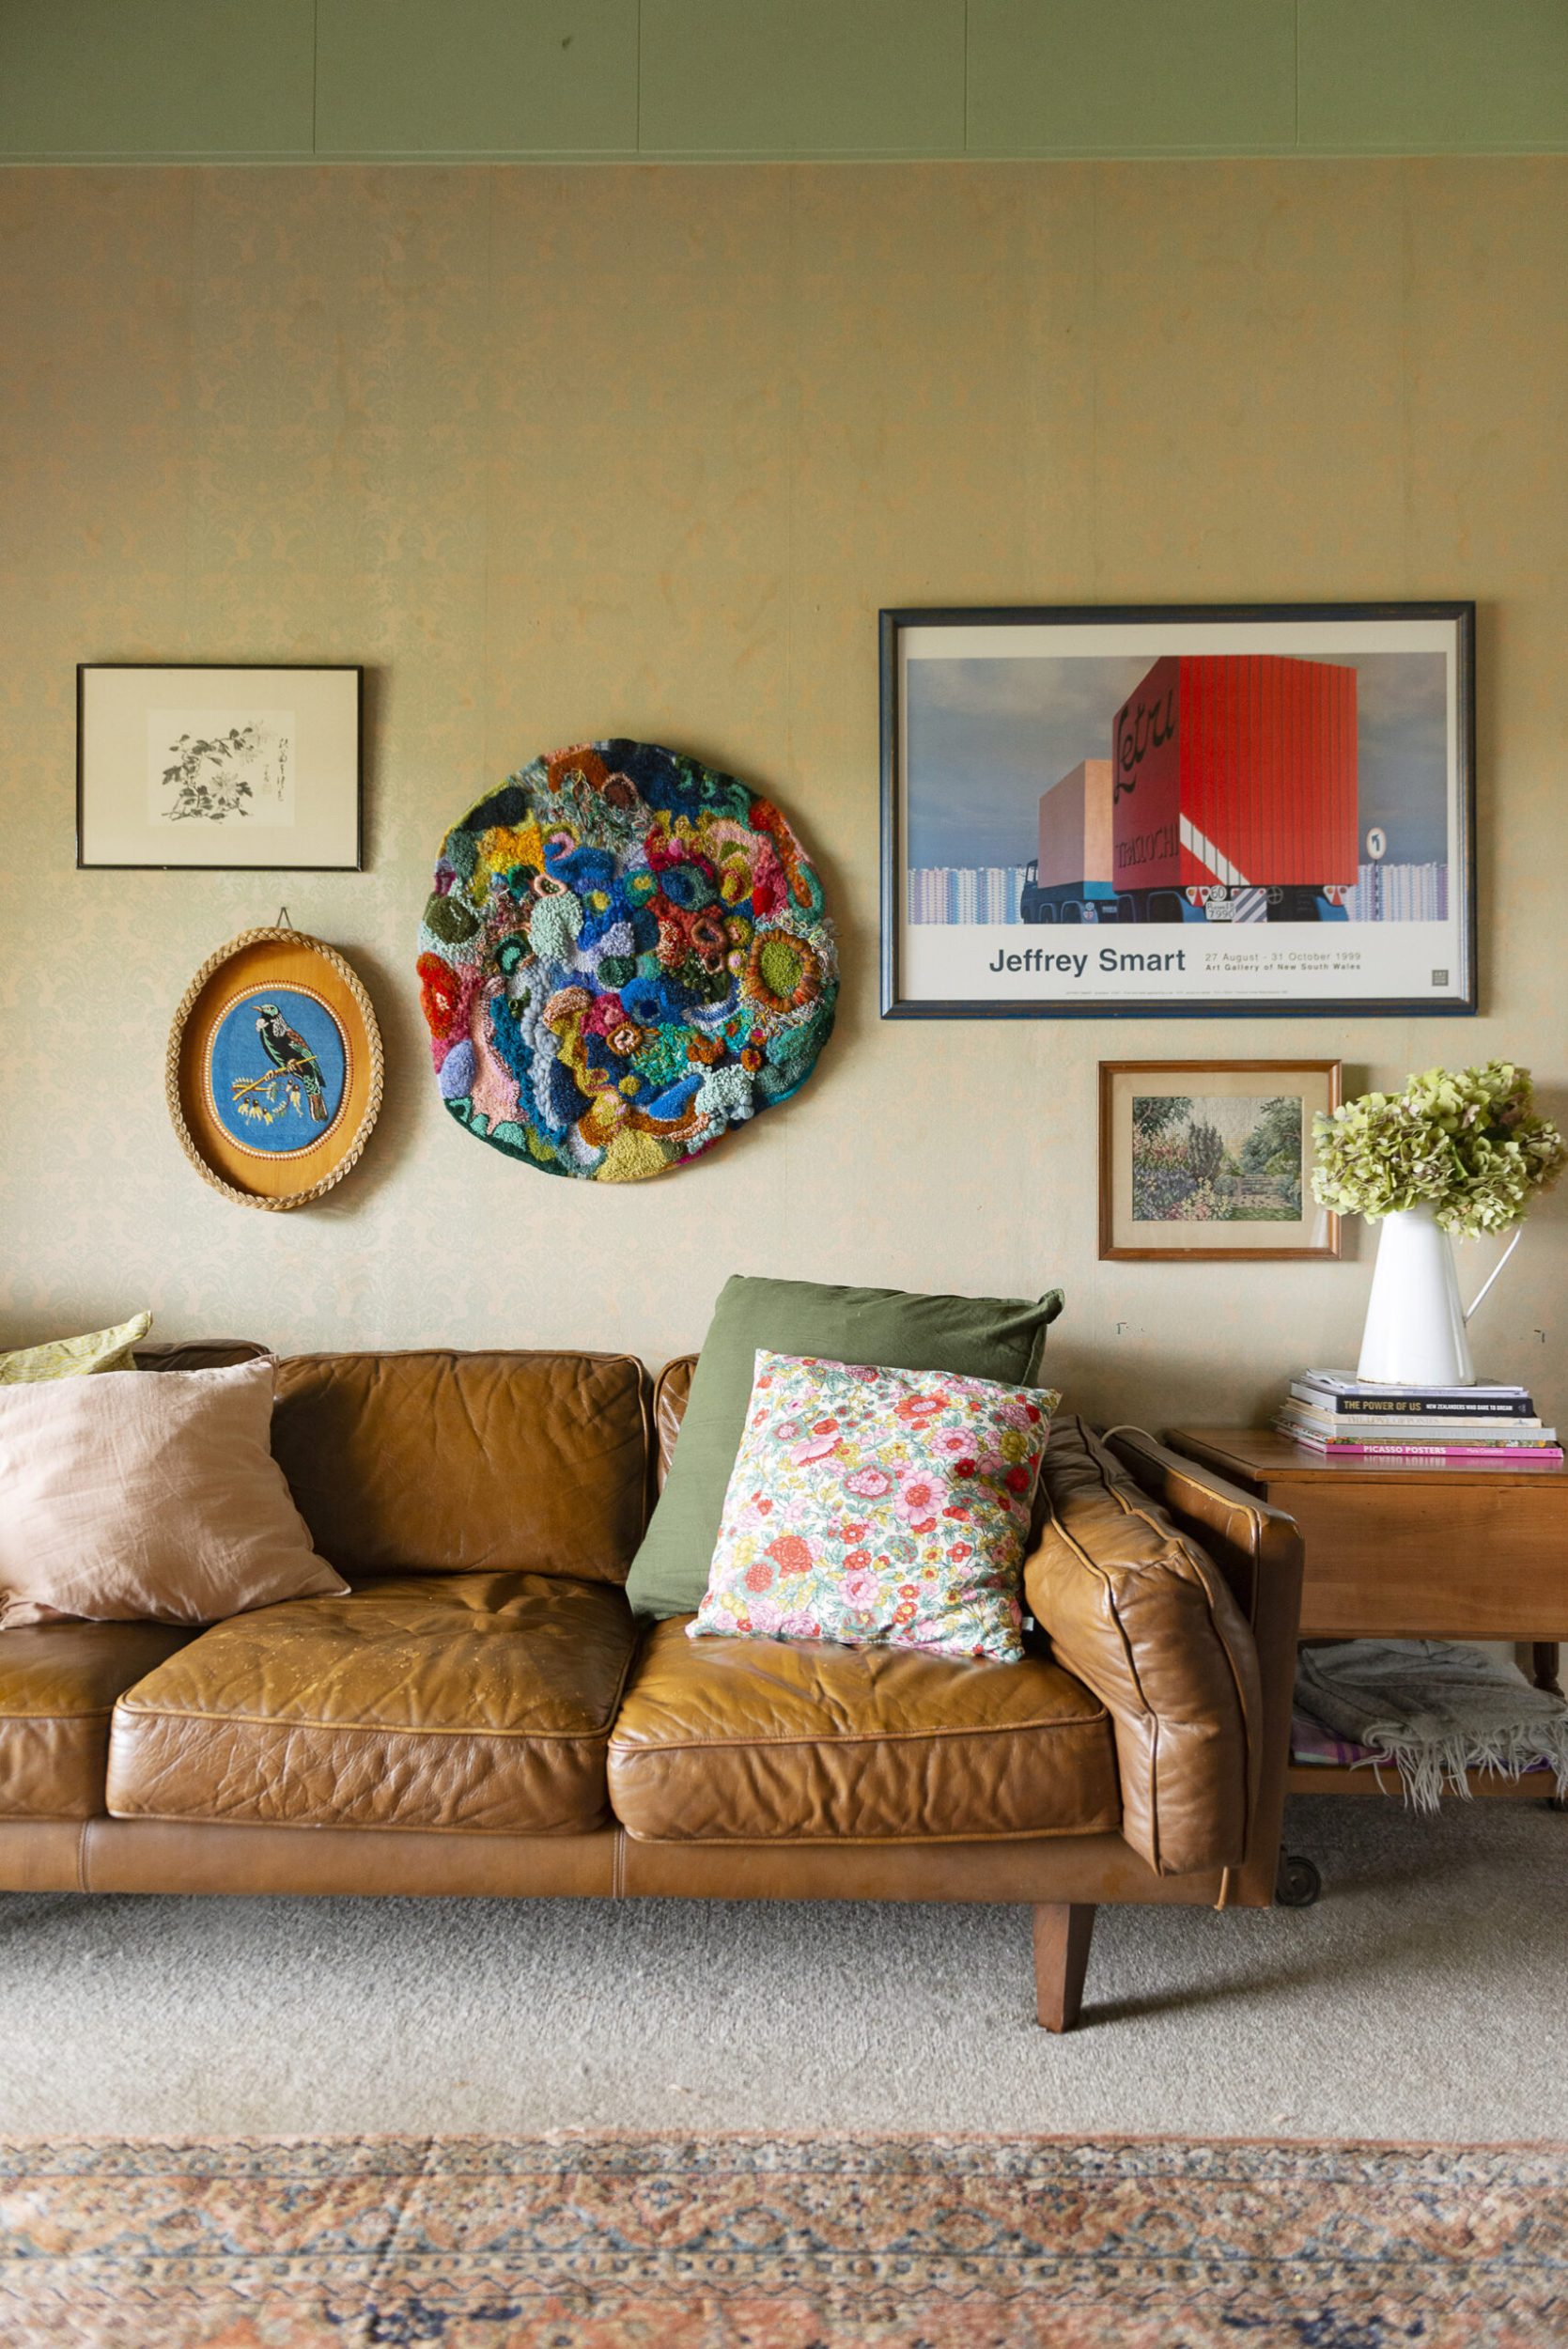 Brown couch in green room with hanging embroidery art by Fleur Woods